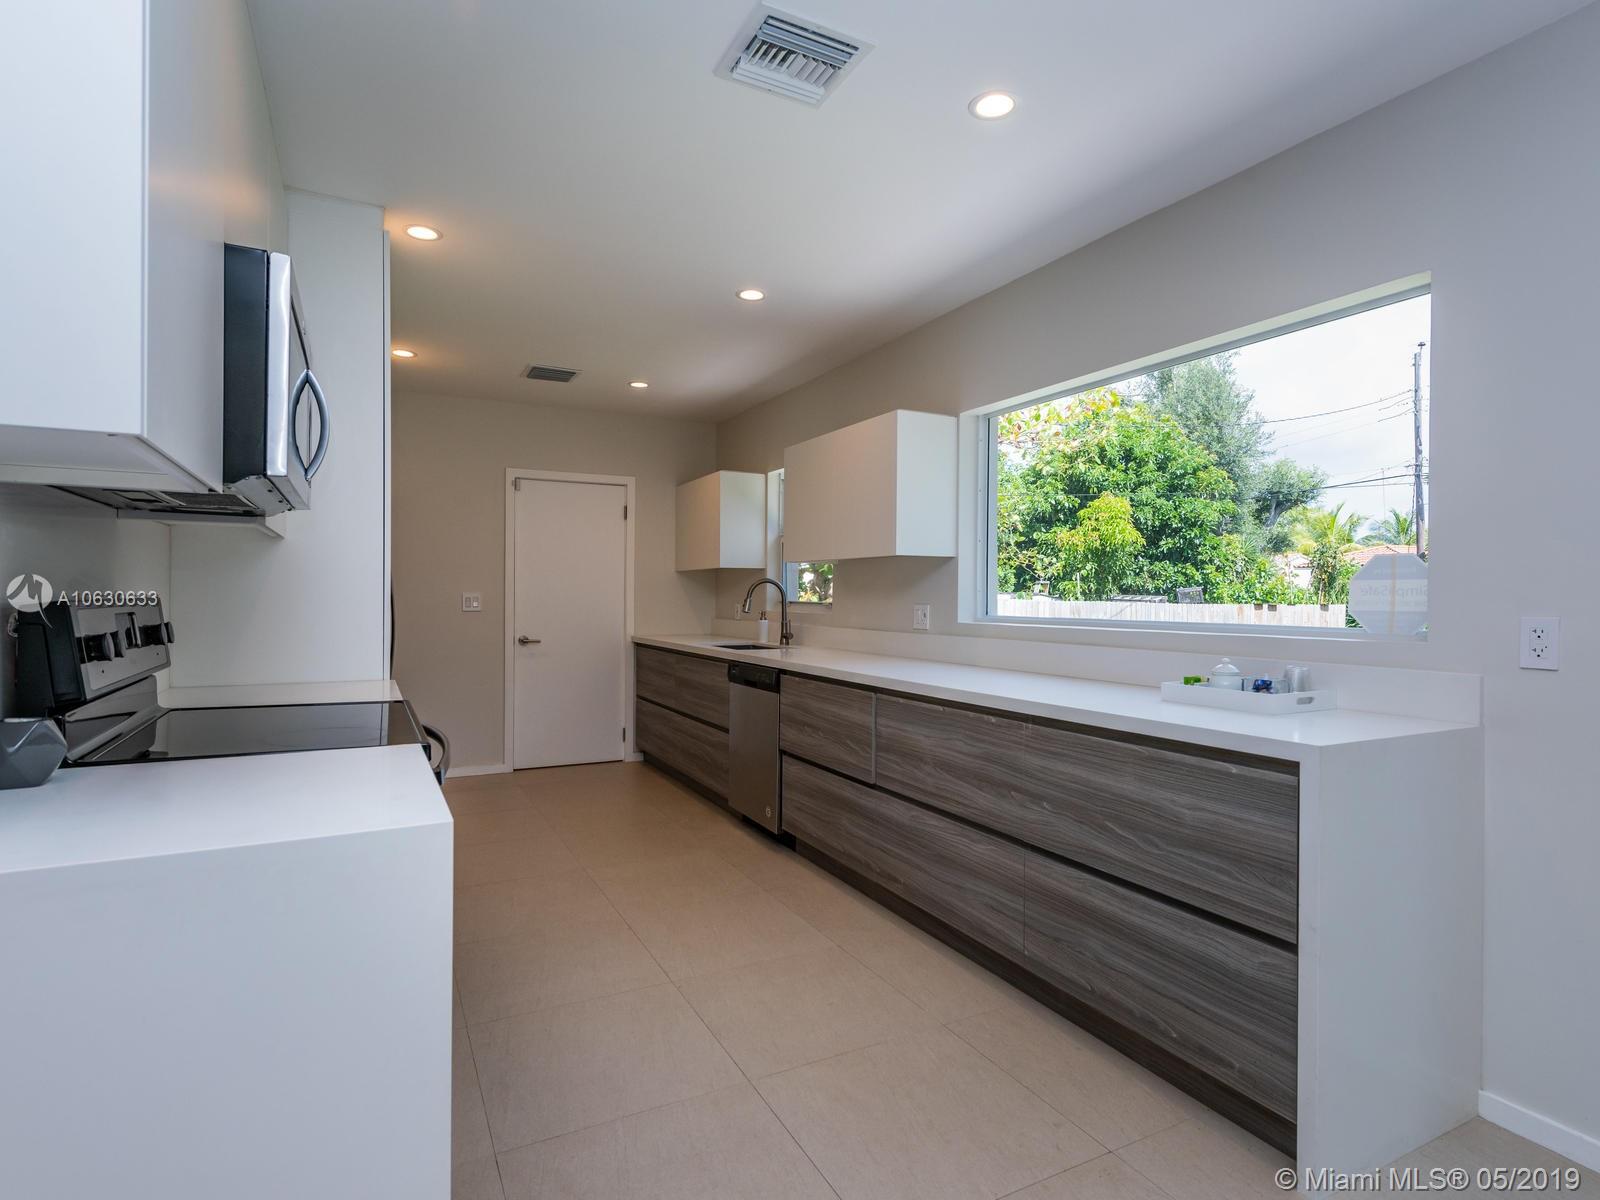 Contemporary custom made kitchen. White quartz counter-top. Stainless steel appliances.